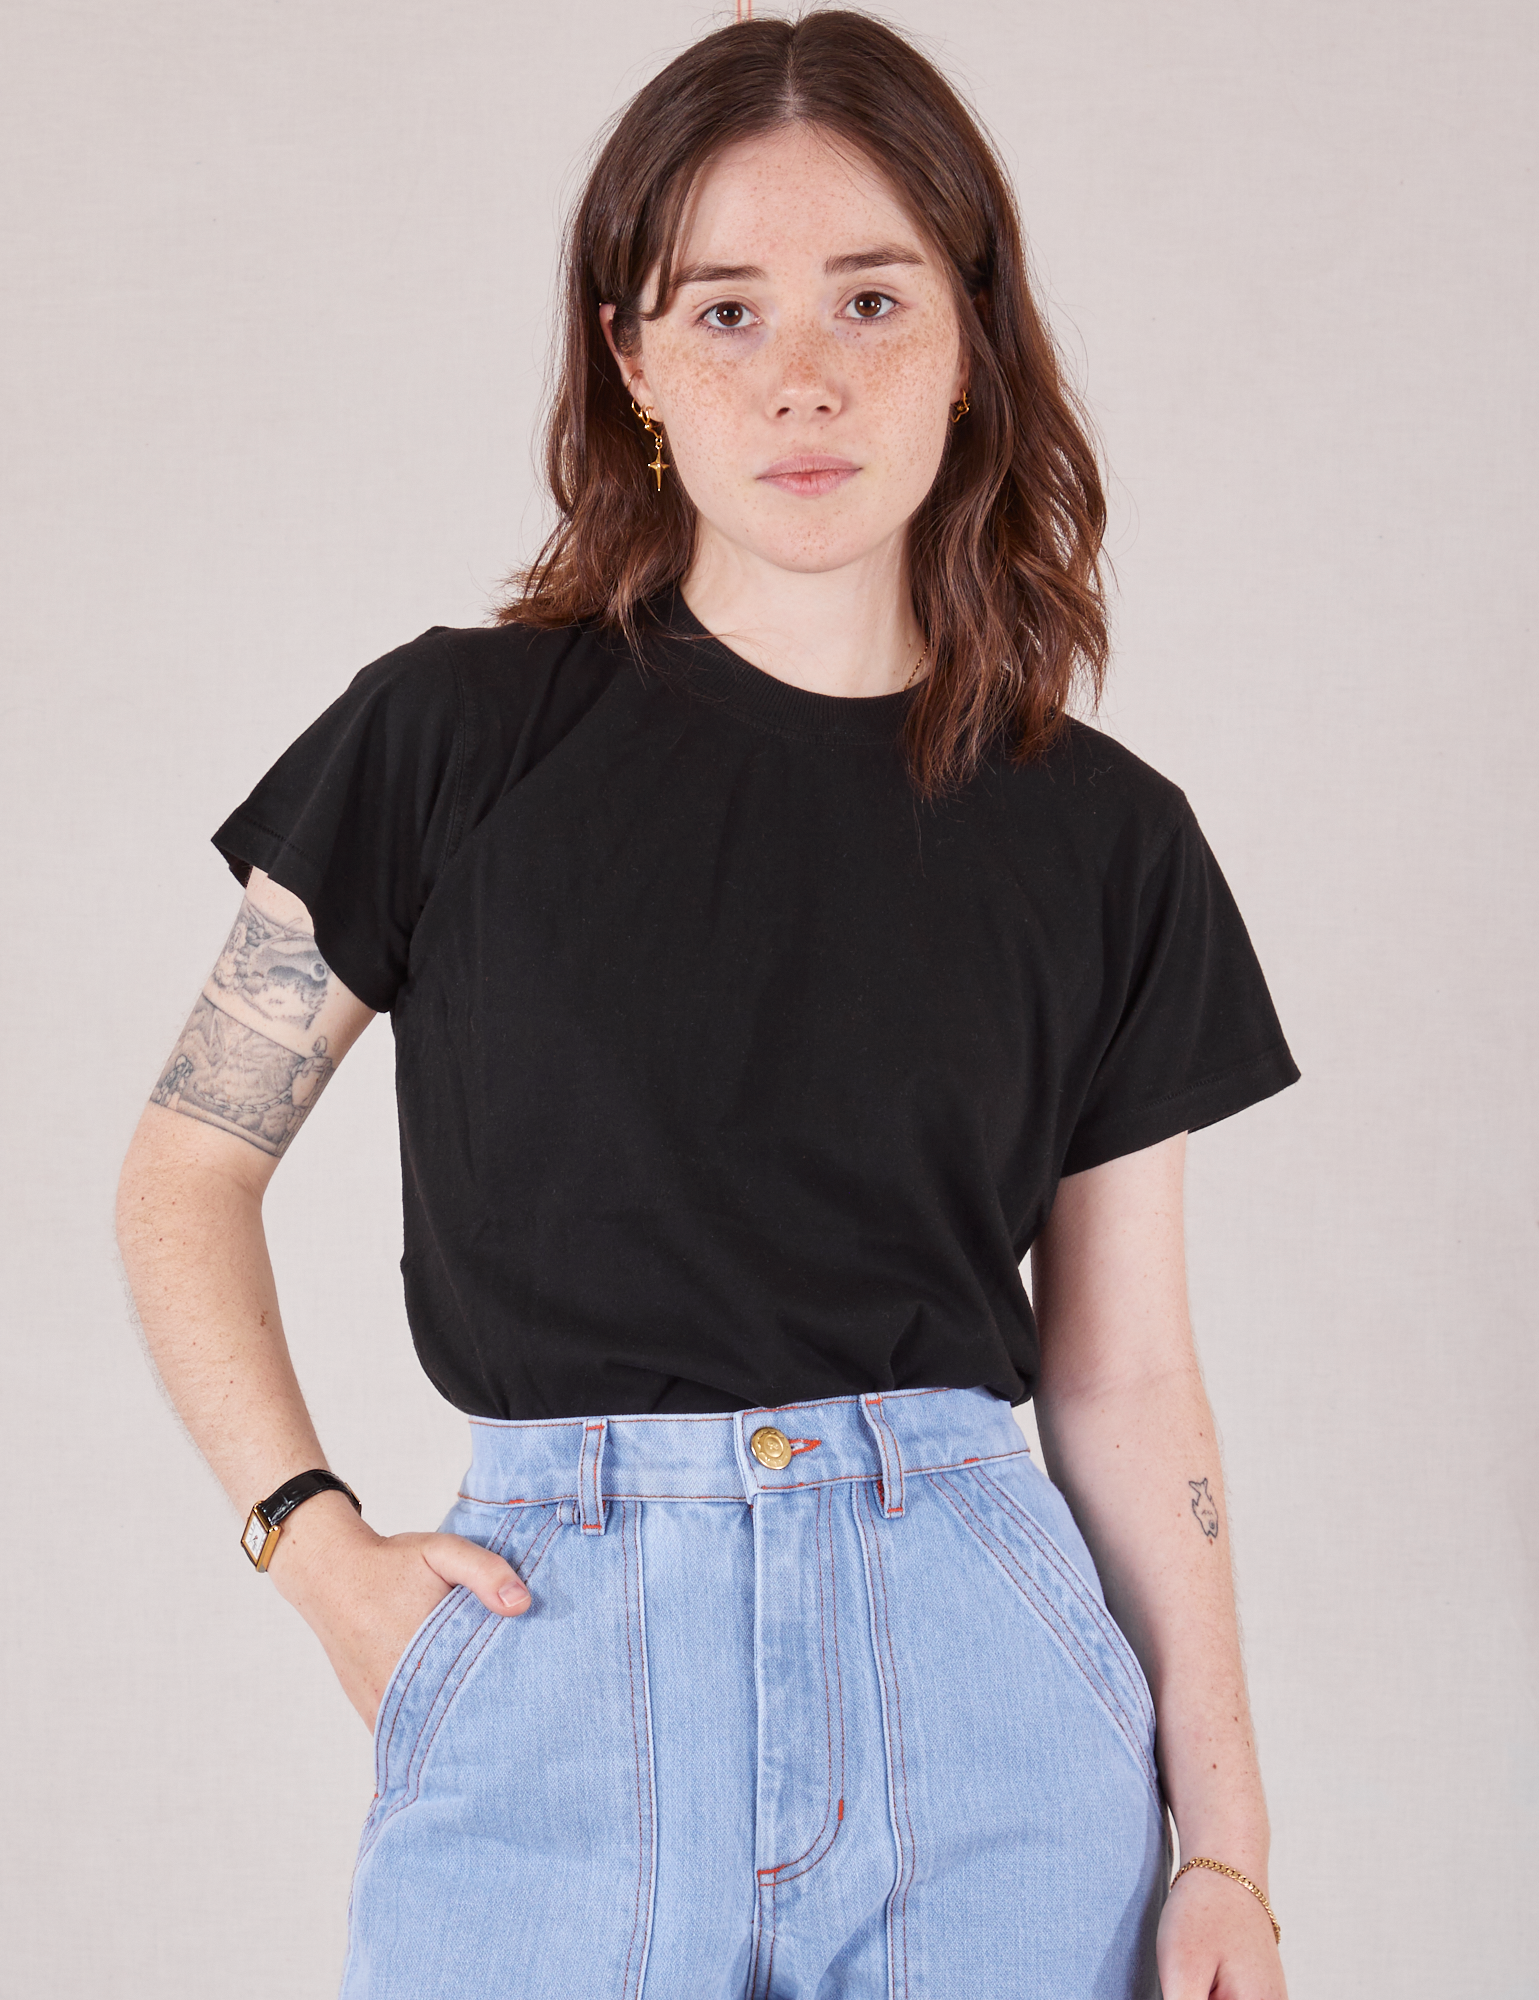 Hana is 5&#39;3&quot; and wearing P Organic Vintage Tee in Basic Black tucked into light wash Carpenter Jeans